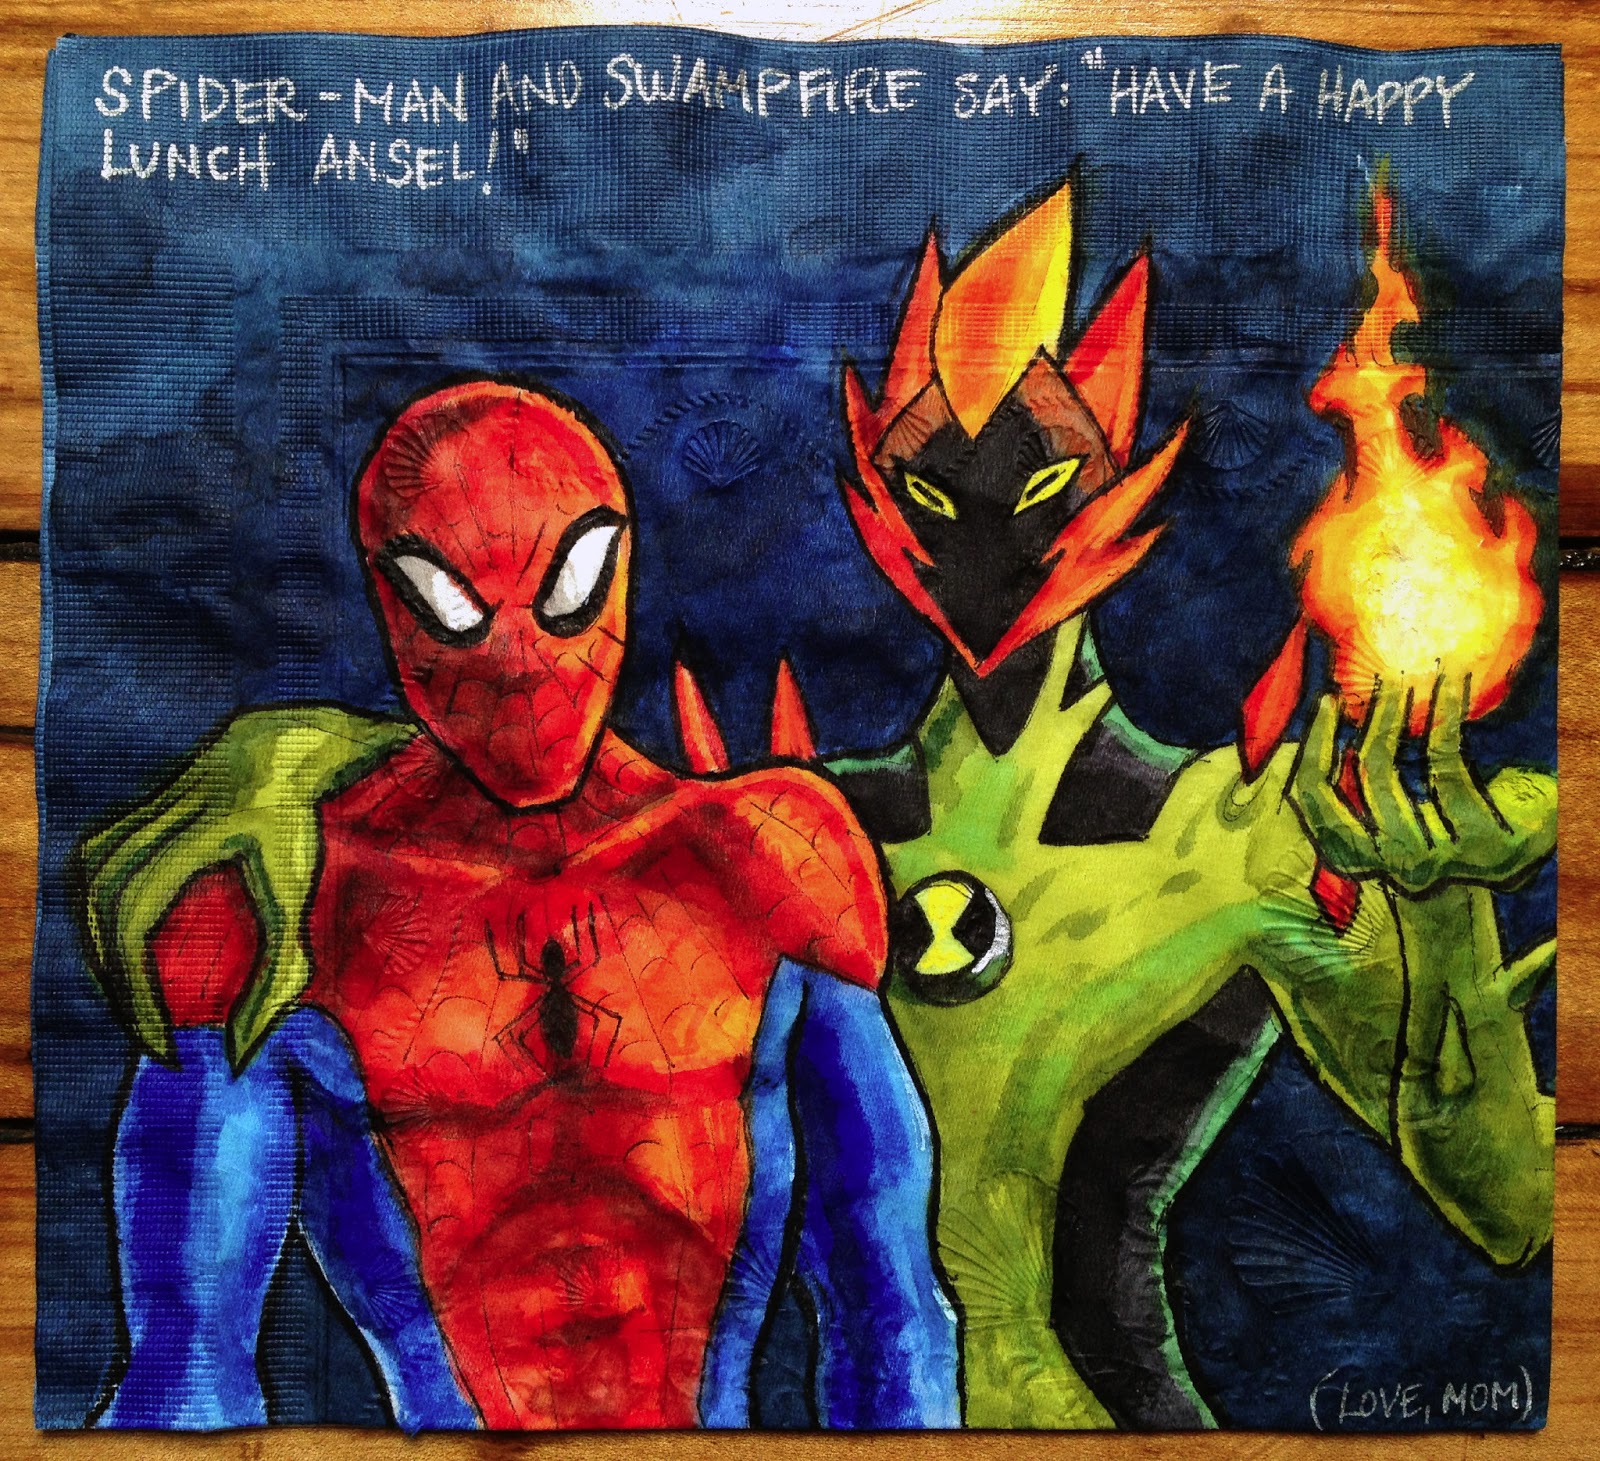 superhero - SpiderMan And Swampfire Say Have A Happy Lunch Ansel!" Love Mom